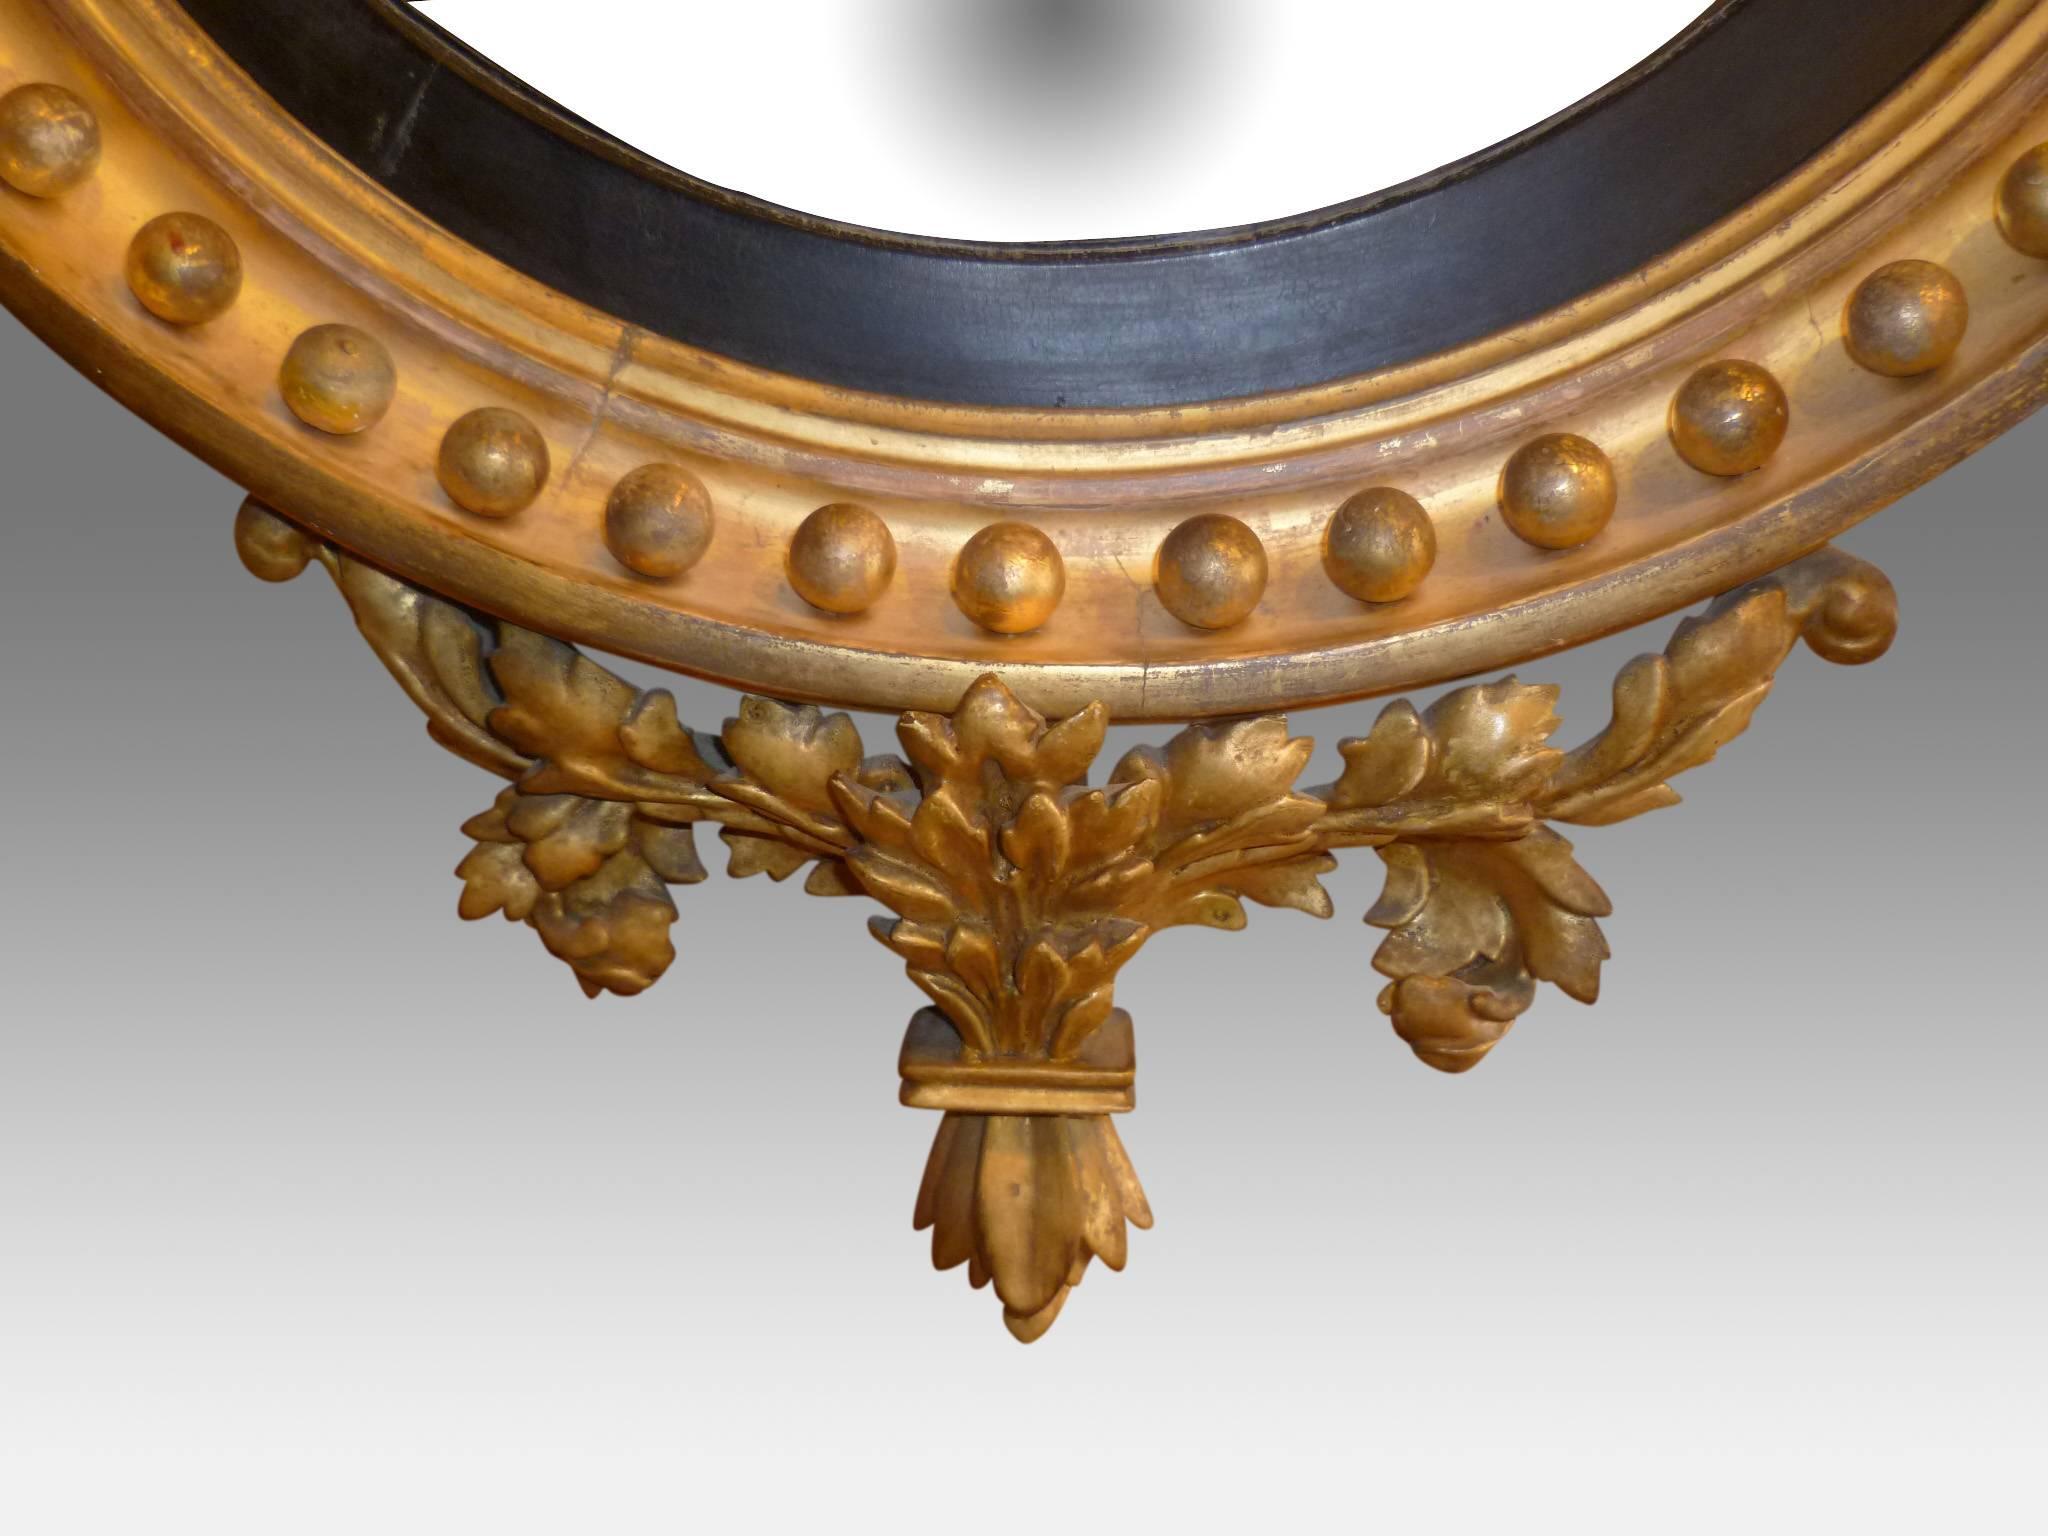 Gilt Regency Convex Miror with Eagle Sumount and Candle Sconces For Sale